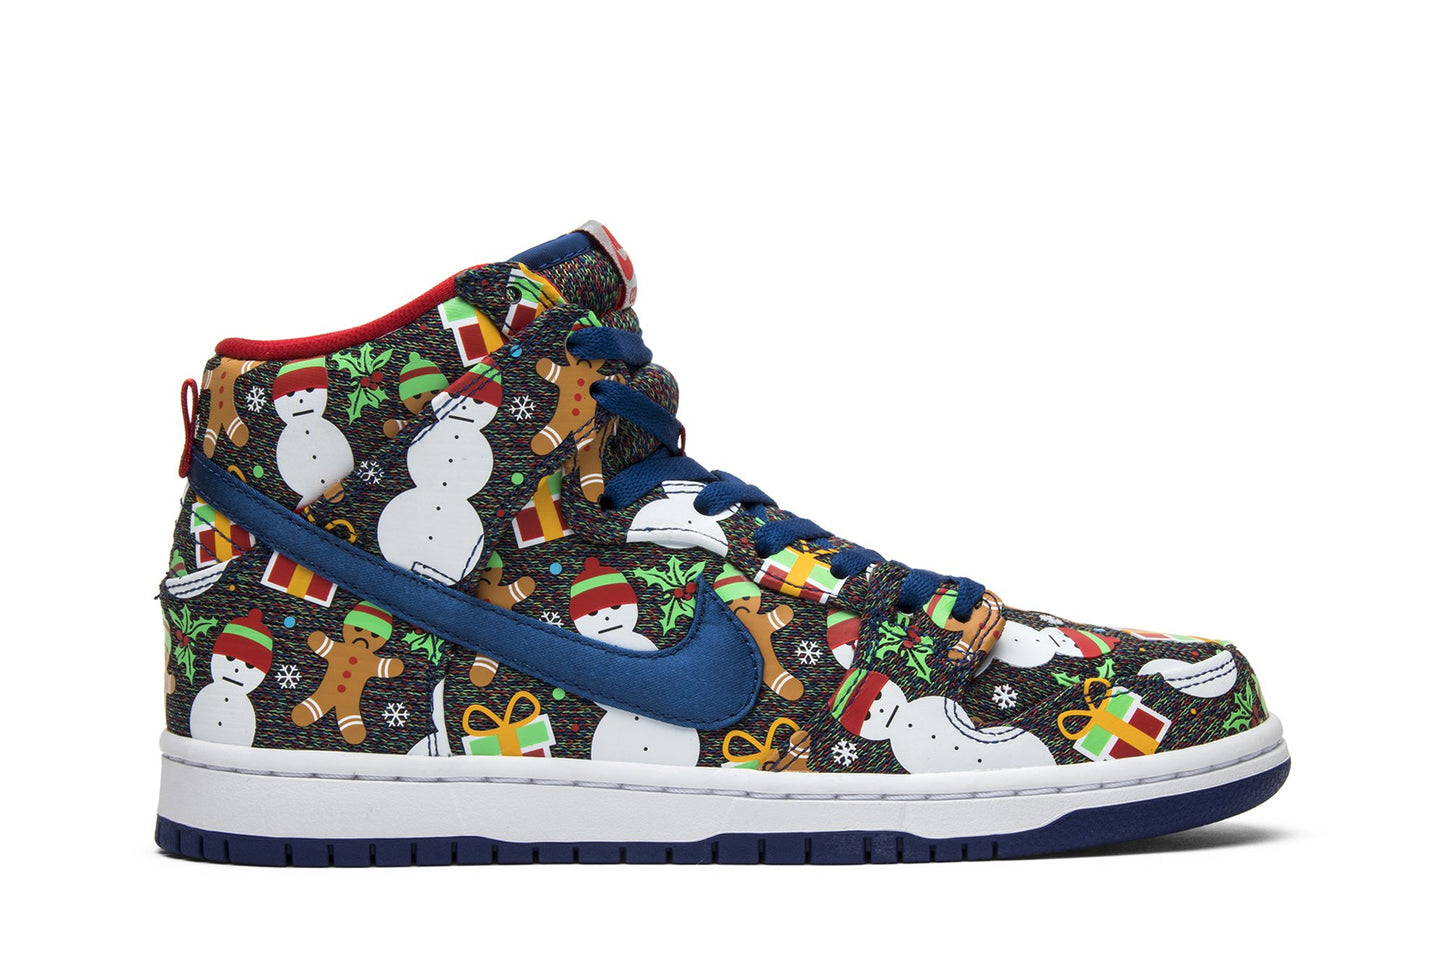 Concepts x SB Dunk Pro High 'Ugly Christmas Sweater' 881758-446